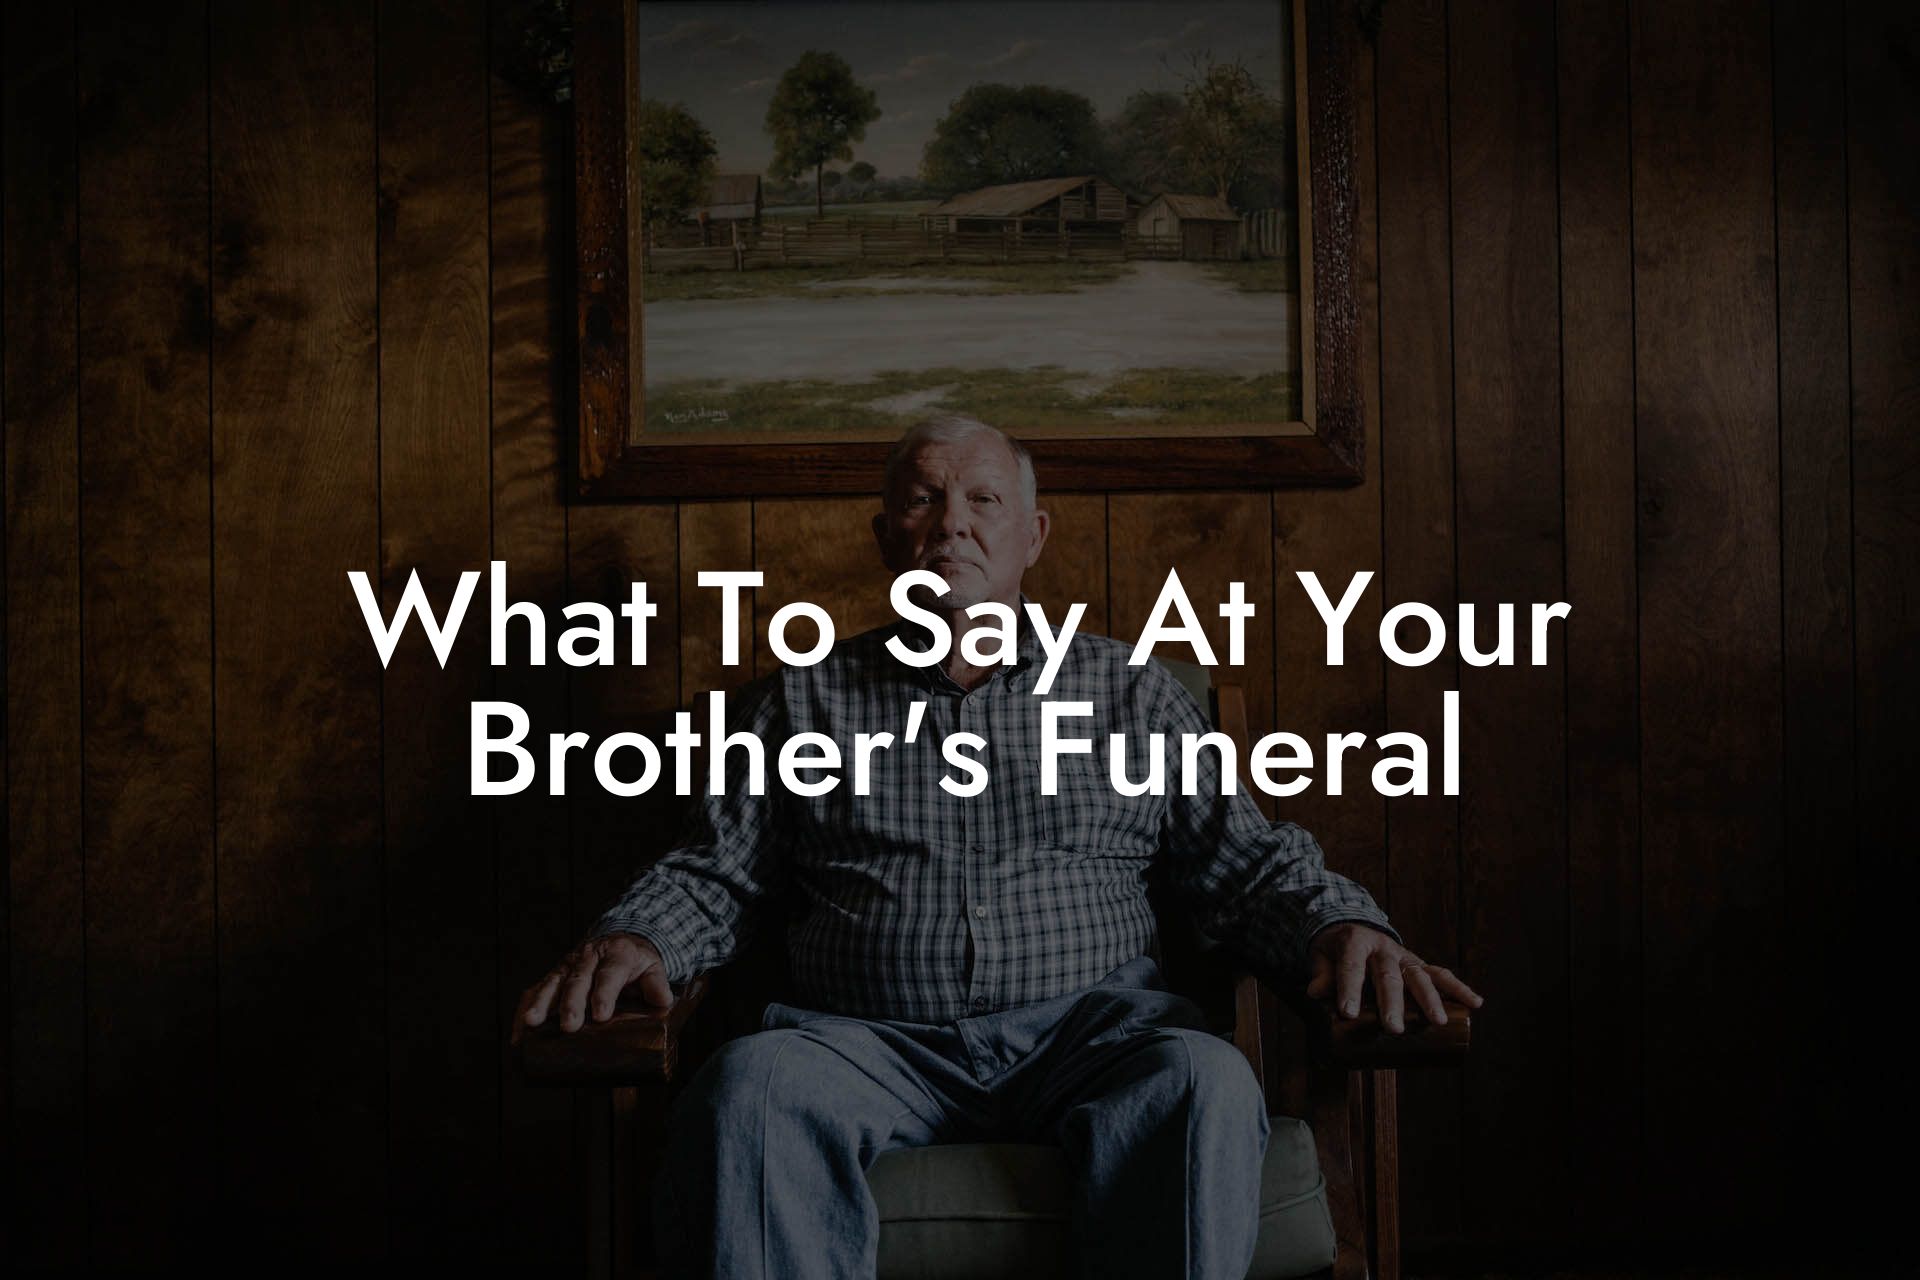 What To Say At Your Brother's Funeral